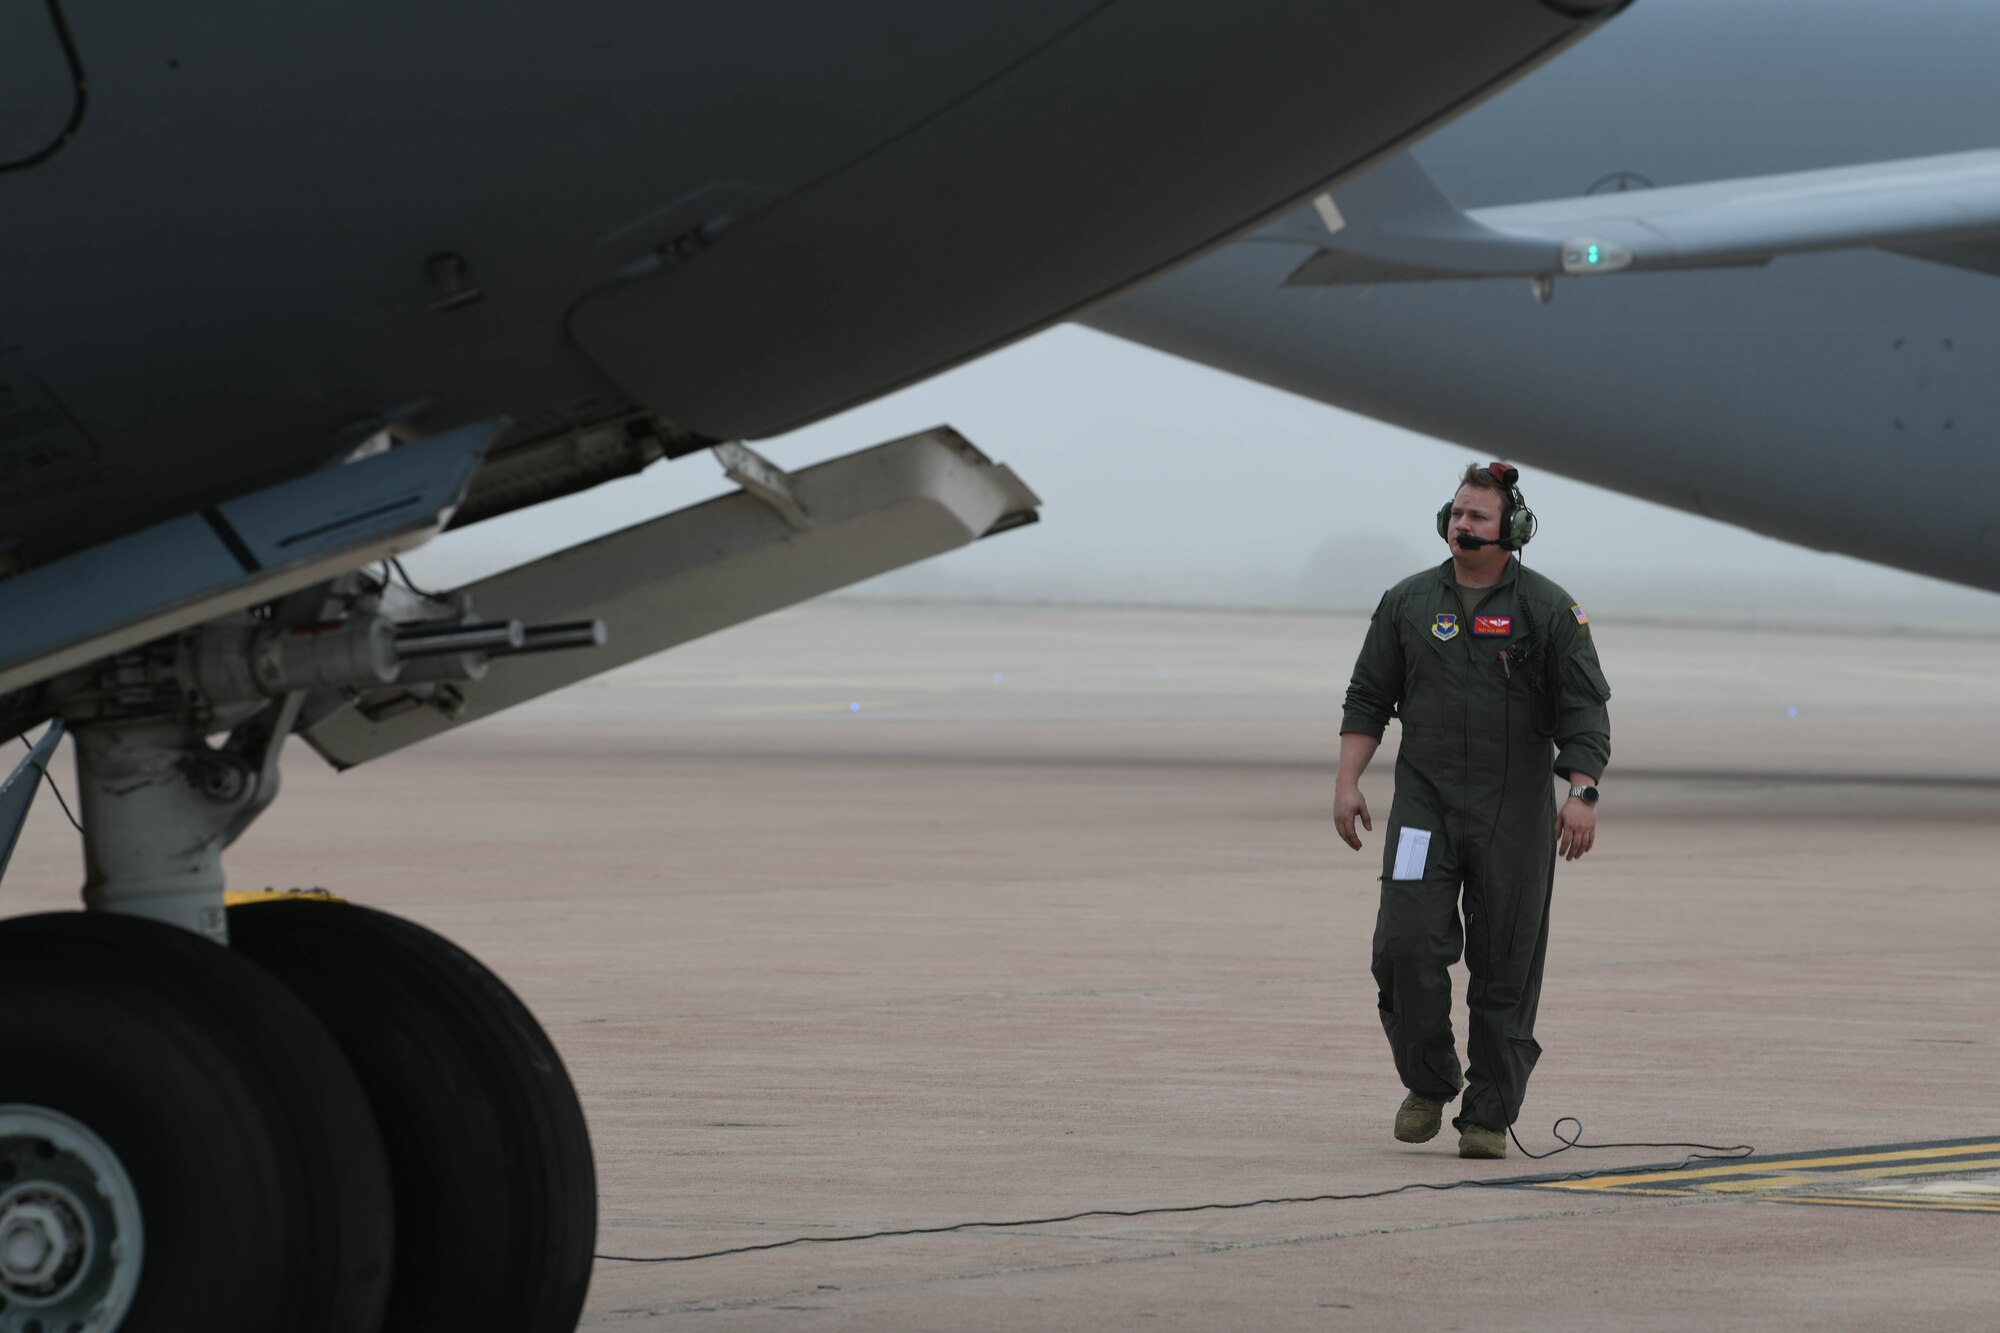 U.S. Air Force Tech. Sgt. Alex Green, 58th Airlift Squadron instructor loadmaster, waits for a C-17 Globemaster III’s engine to start during a severe weather flyaway at Altus Air Force Base, Oklahoma, May 4, 2022. All aircraft returned the next day to continue the base’s mission: “training exceptional mobility Airmen”. (U.S. Air Force photo by Airman 1st Class Trenton Jancze)